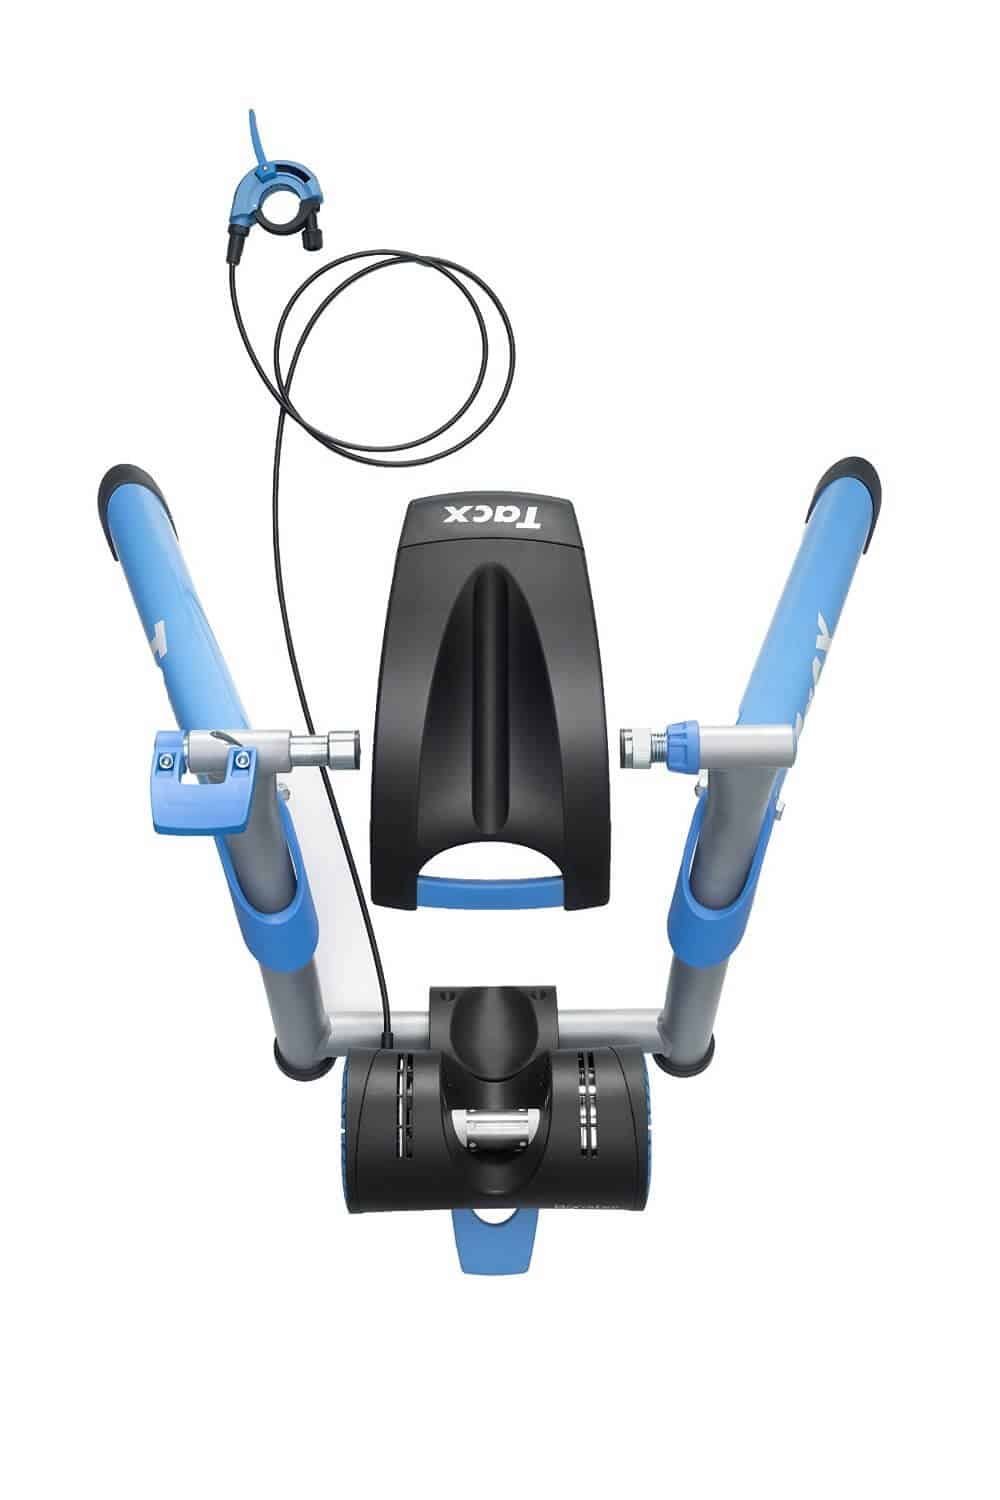 tacx booster turbo trainer review